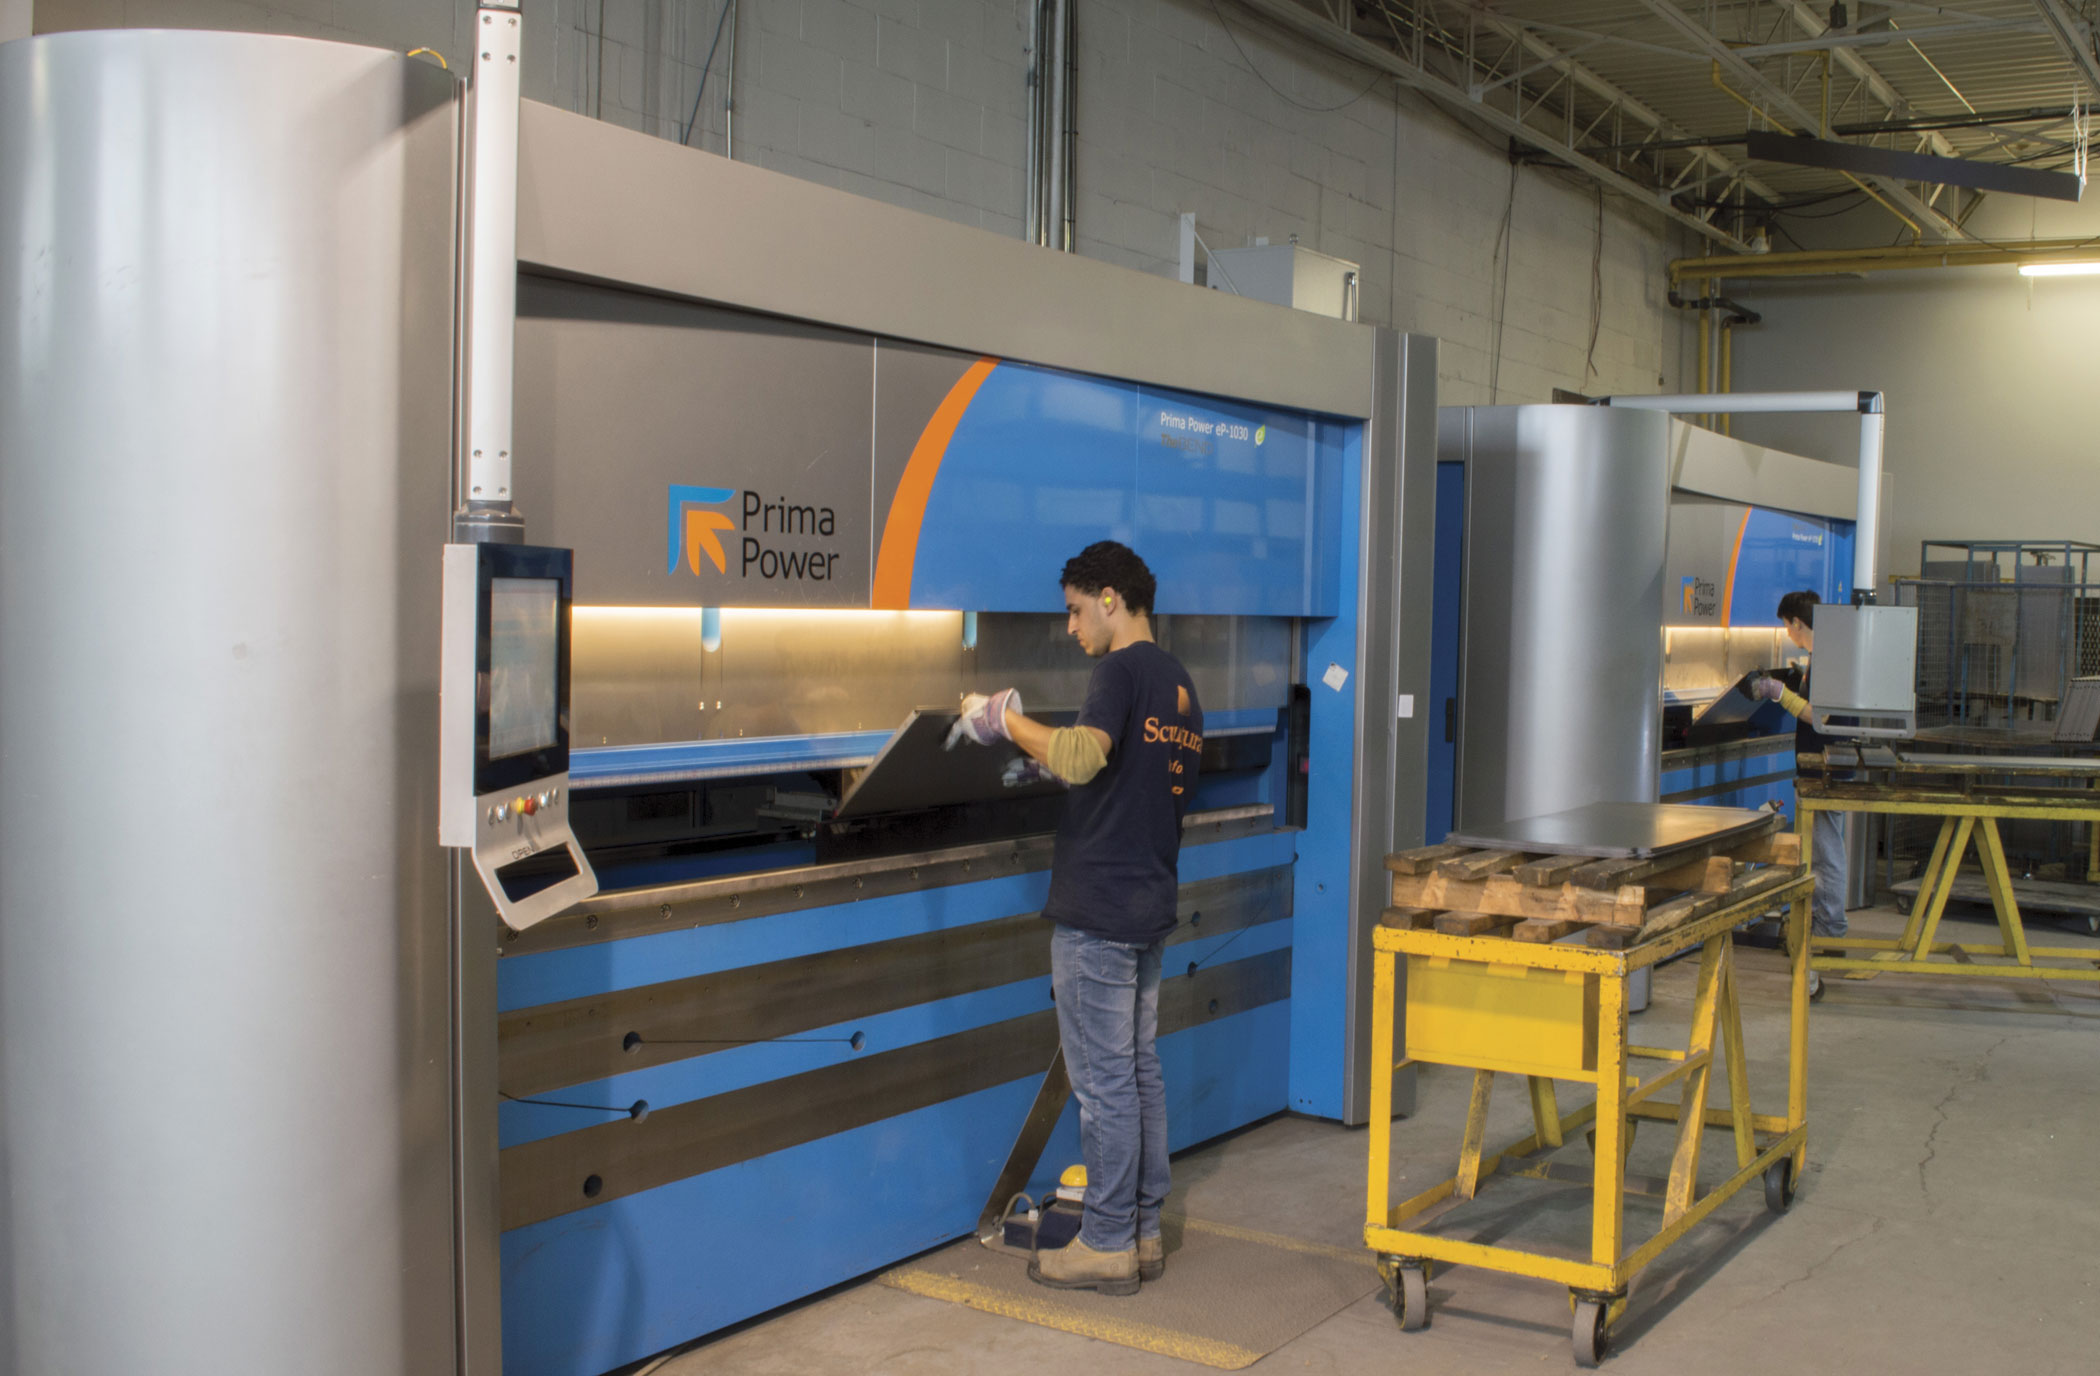 When Flexfab purchased the E6 turret punch press it also purchased two Prima Power eP-1030 servo electric press brakes.